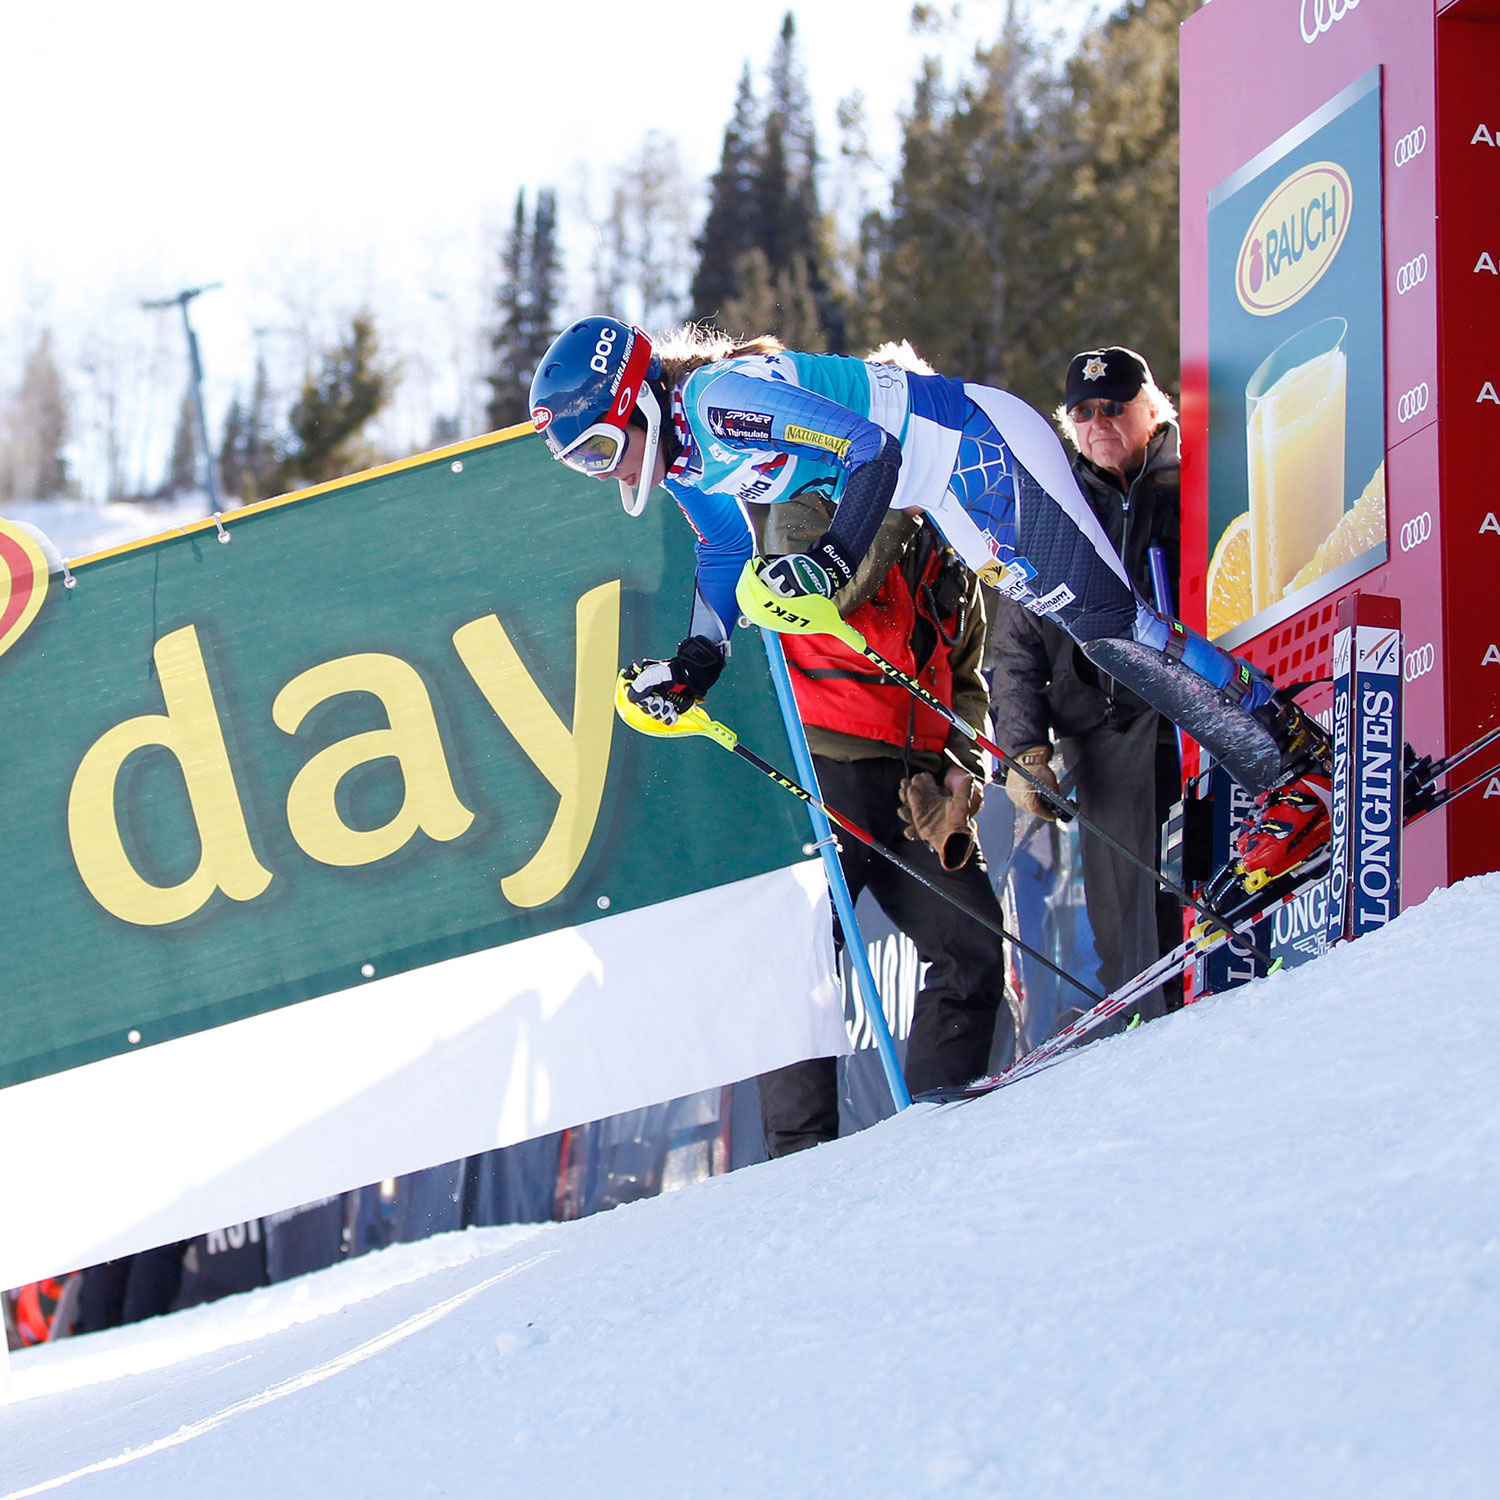 Can Shiffrin end the Aspen slalom drought for the U.S.? GEPA